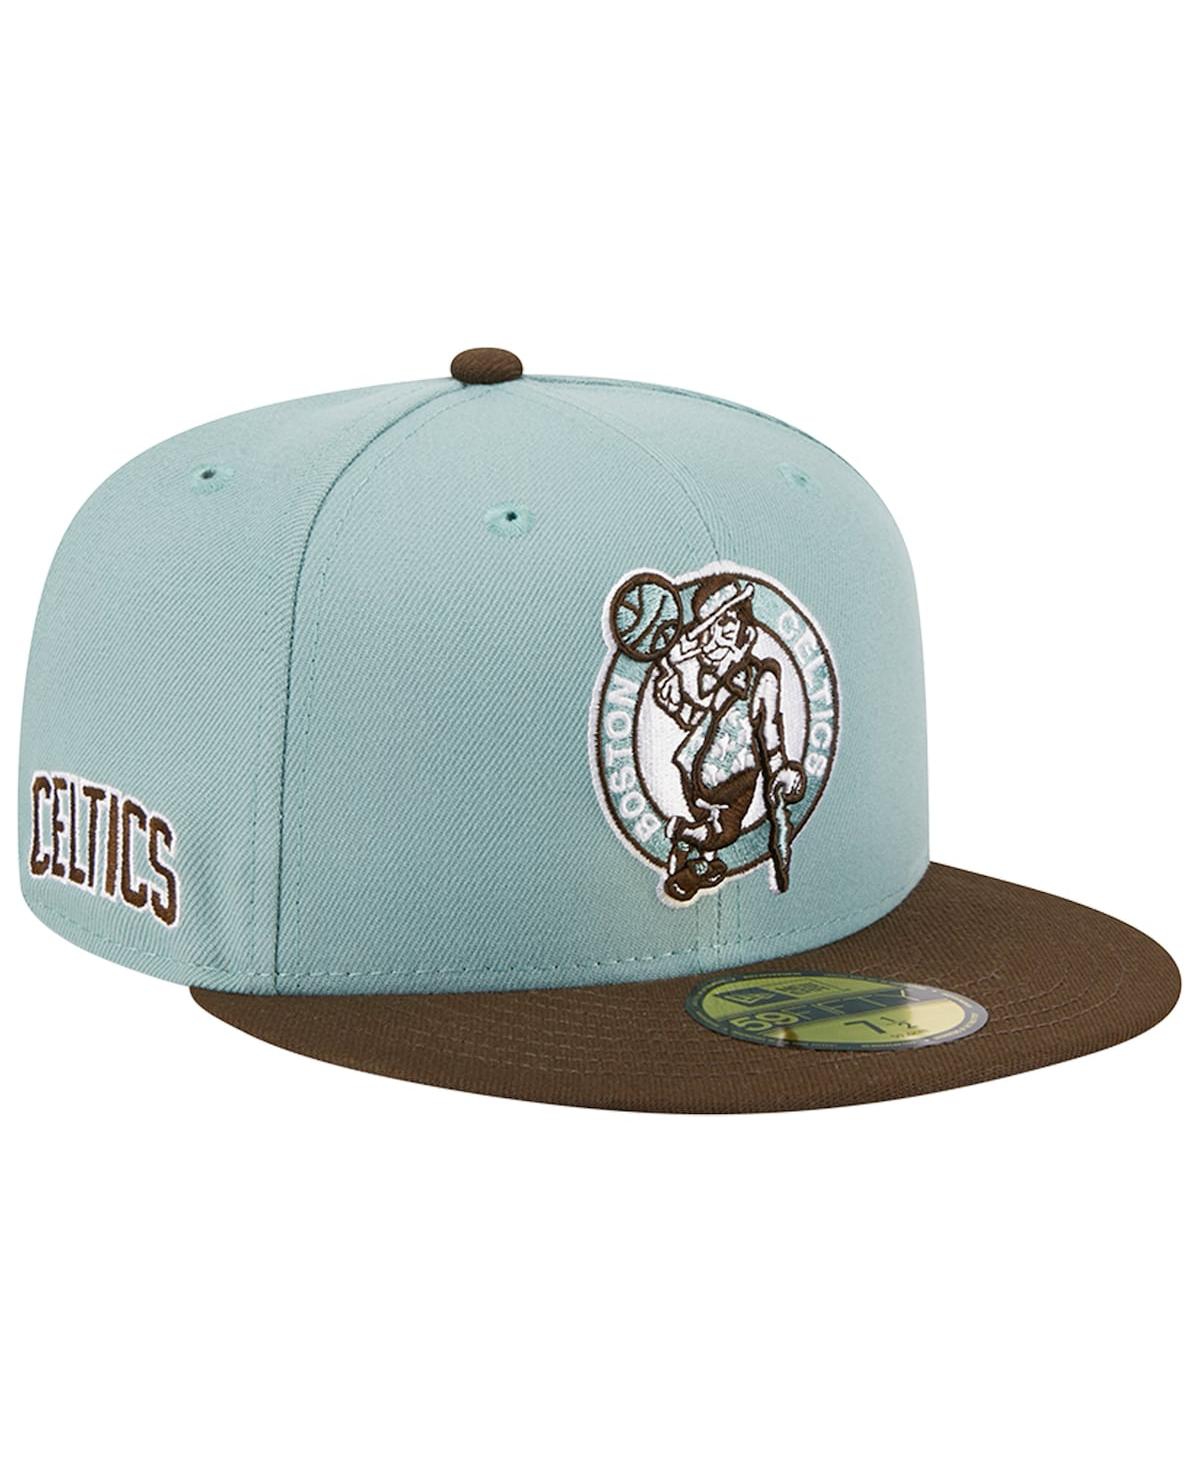 Men's New Era Light Blue, Brown Boston Celtics Two-Tone 59FIFTY Fitted Hat - Light Blue, Brown